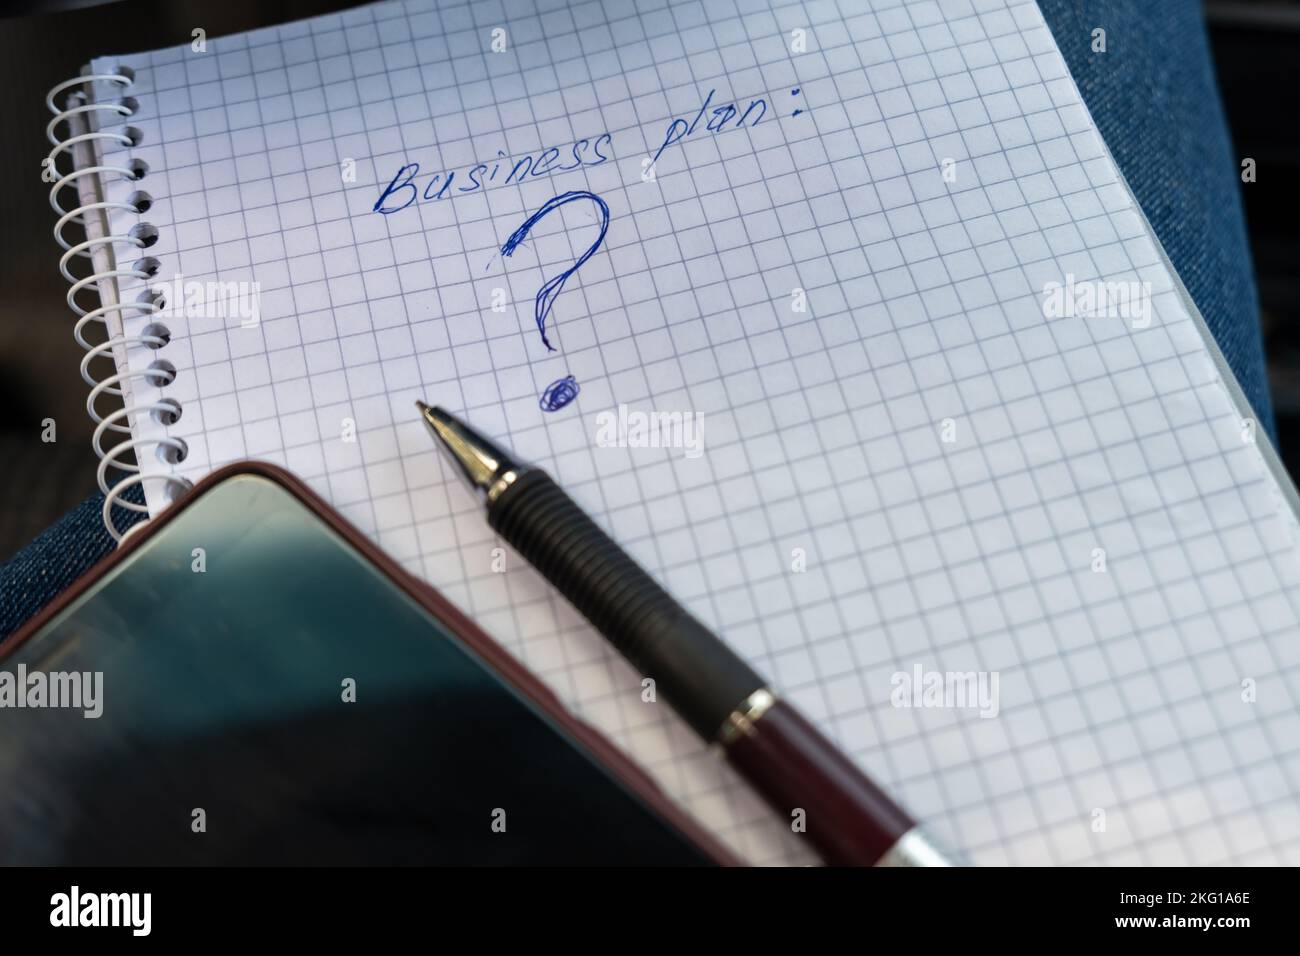 Business plan and question mark written on a notebook. Reflections on enrichment, entrepreneurship. Stock Photo